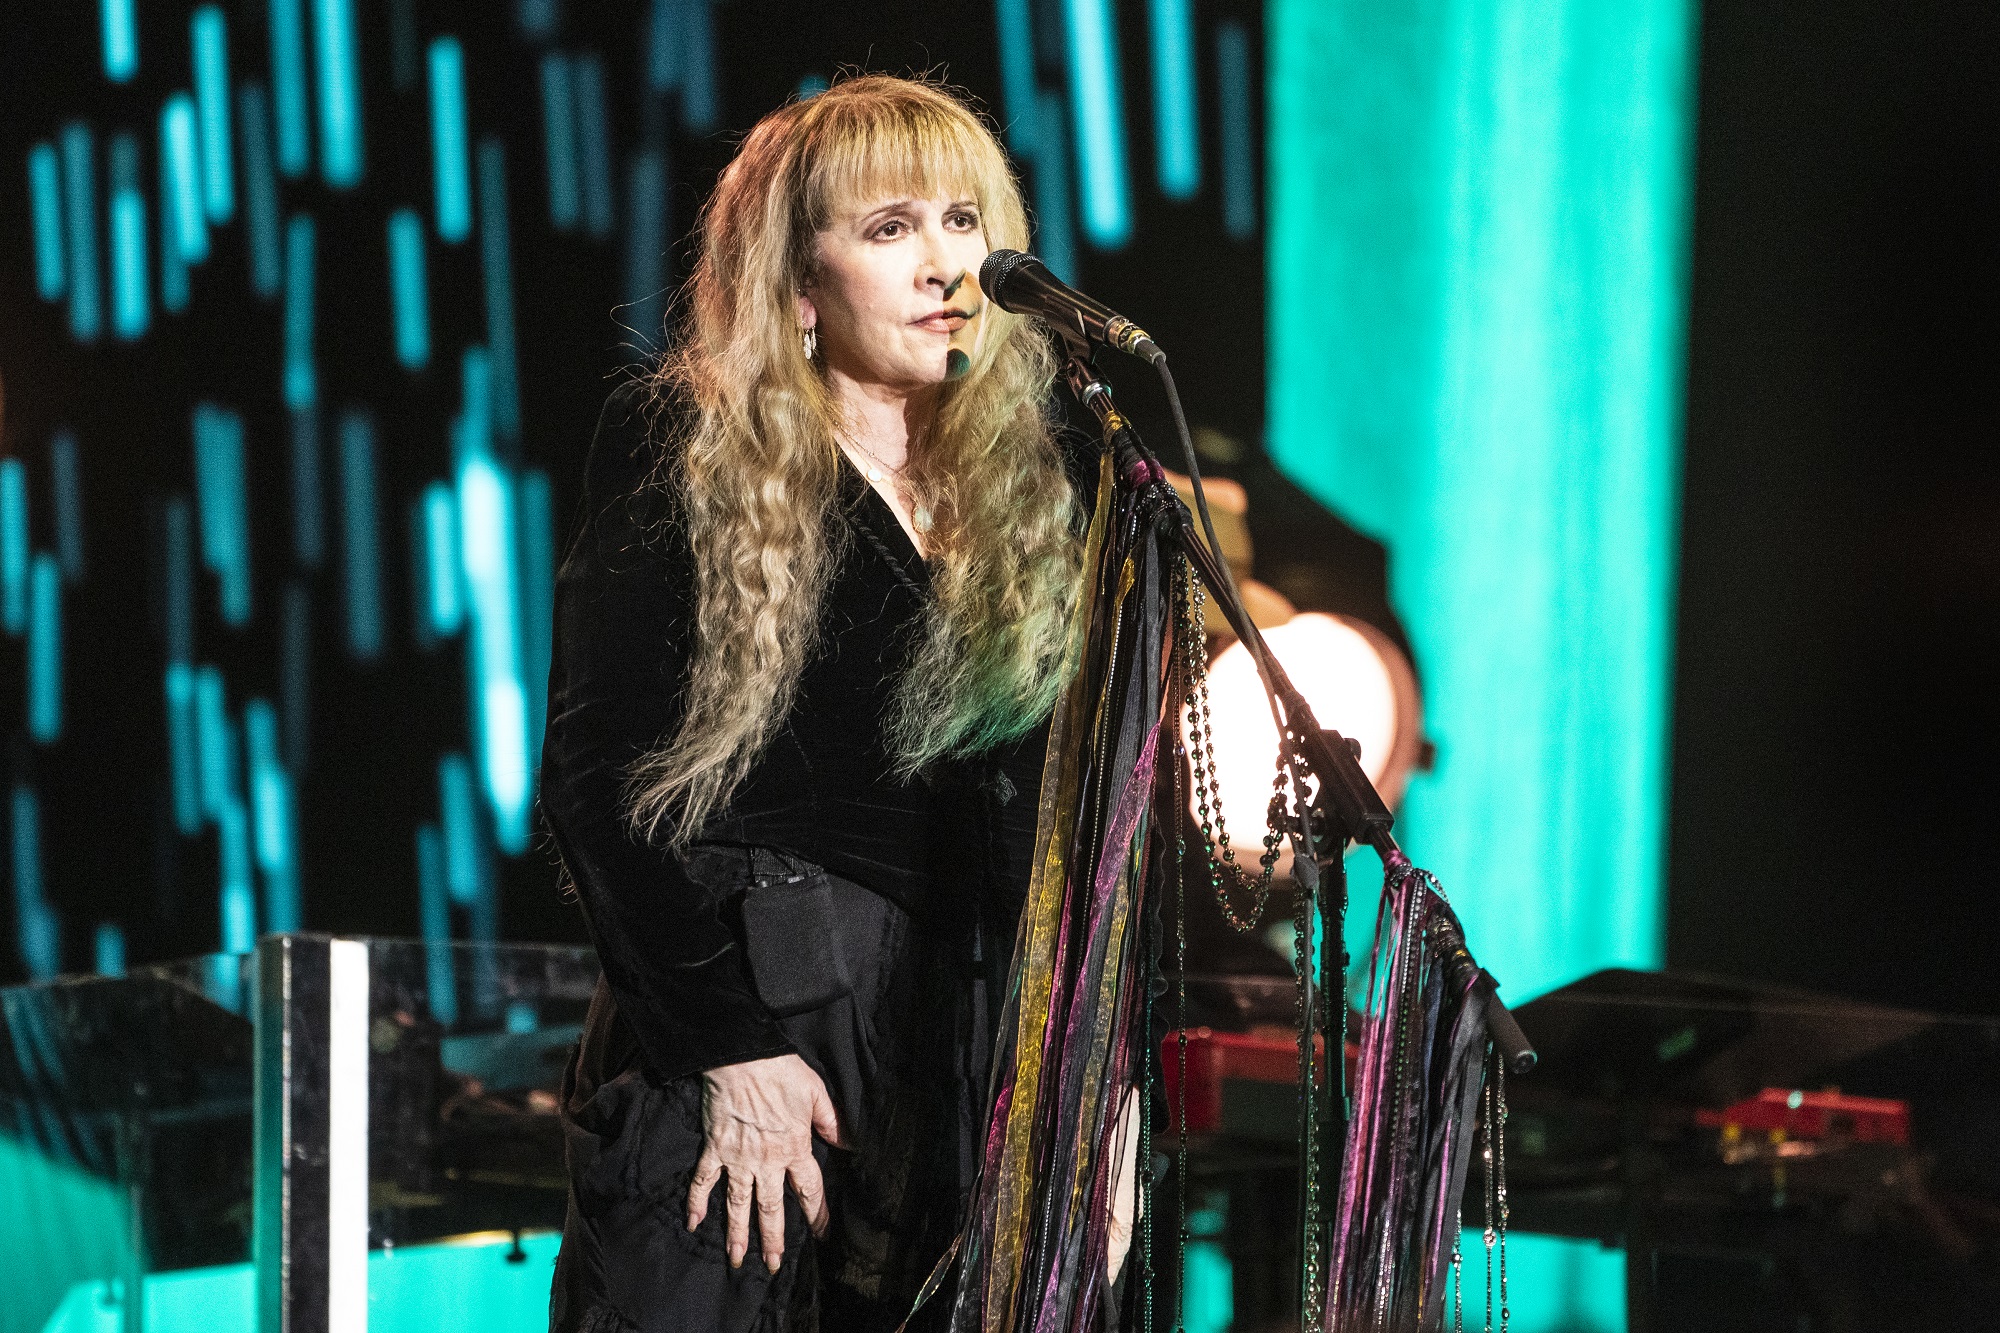 Stevie Nicks’ ‘Long Way to Go’ Was Inspired by Advice She’d Received From a Friend About a Man